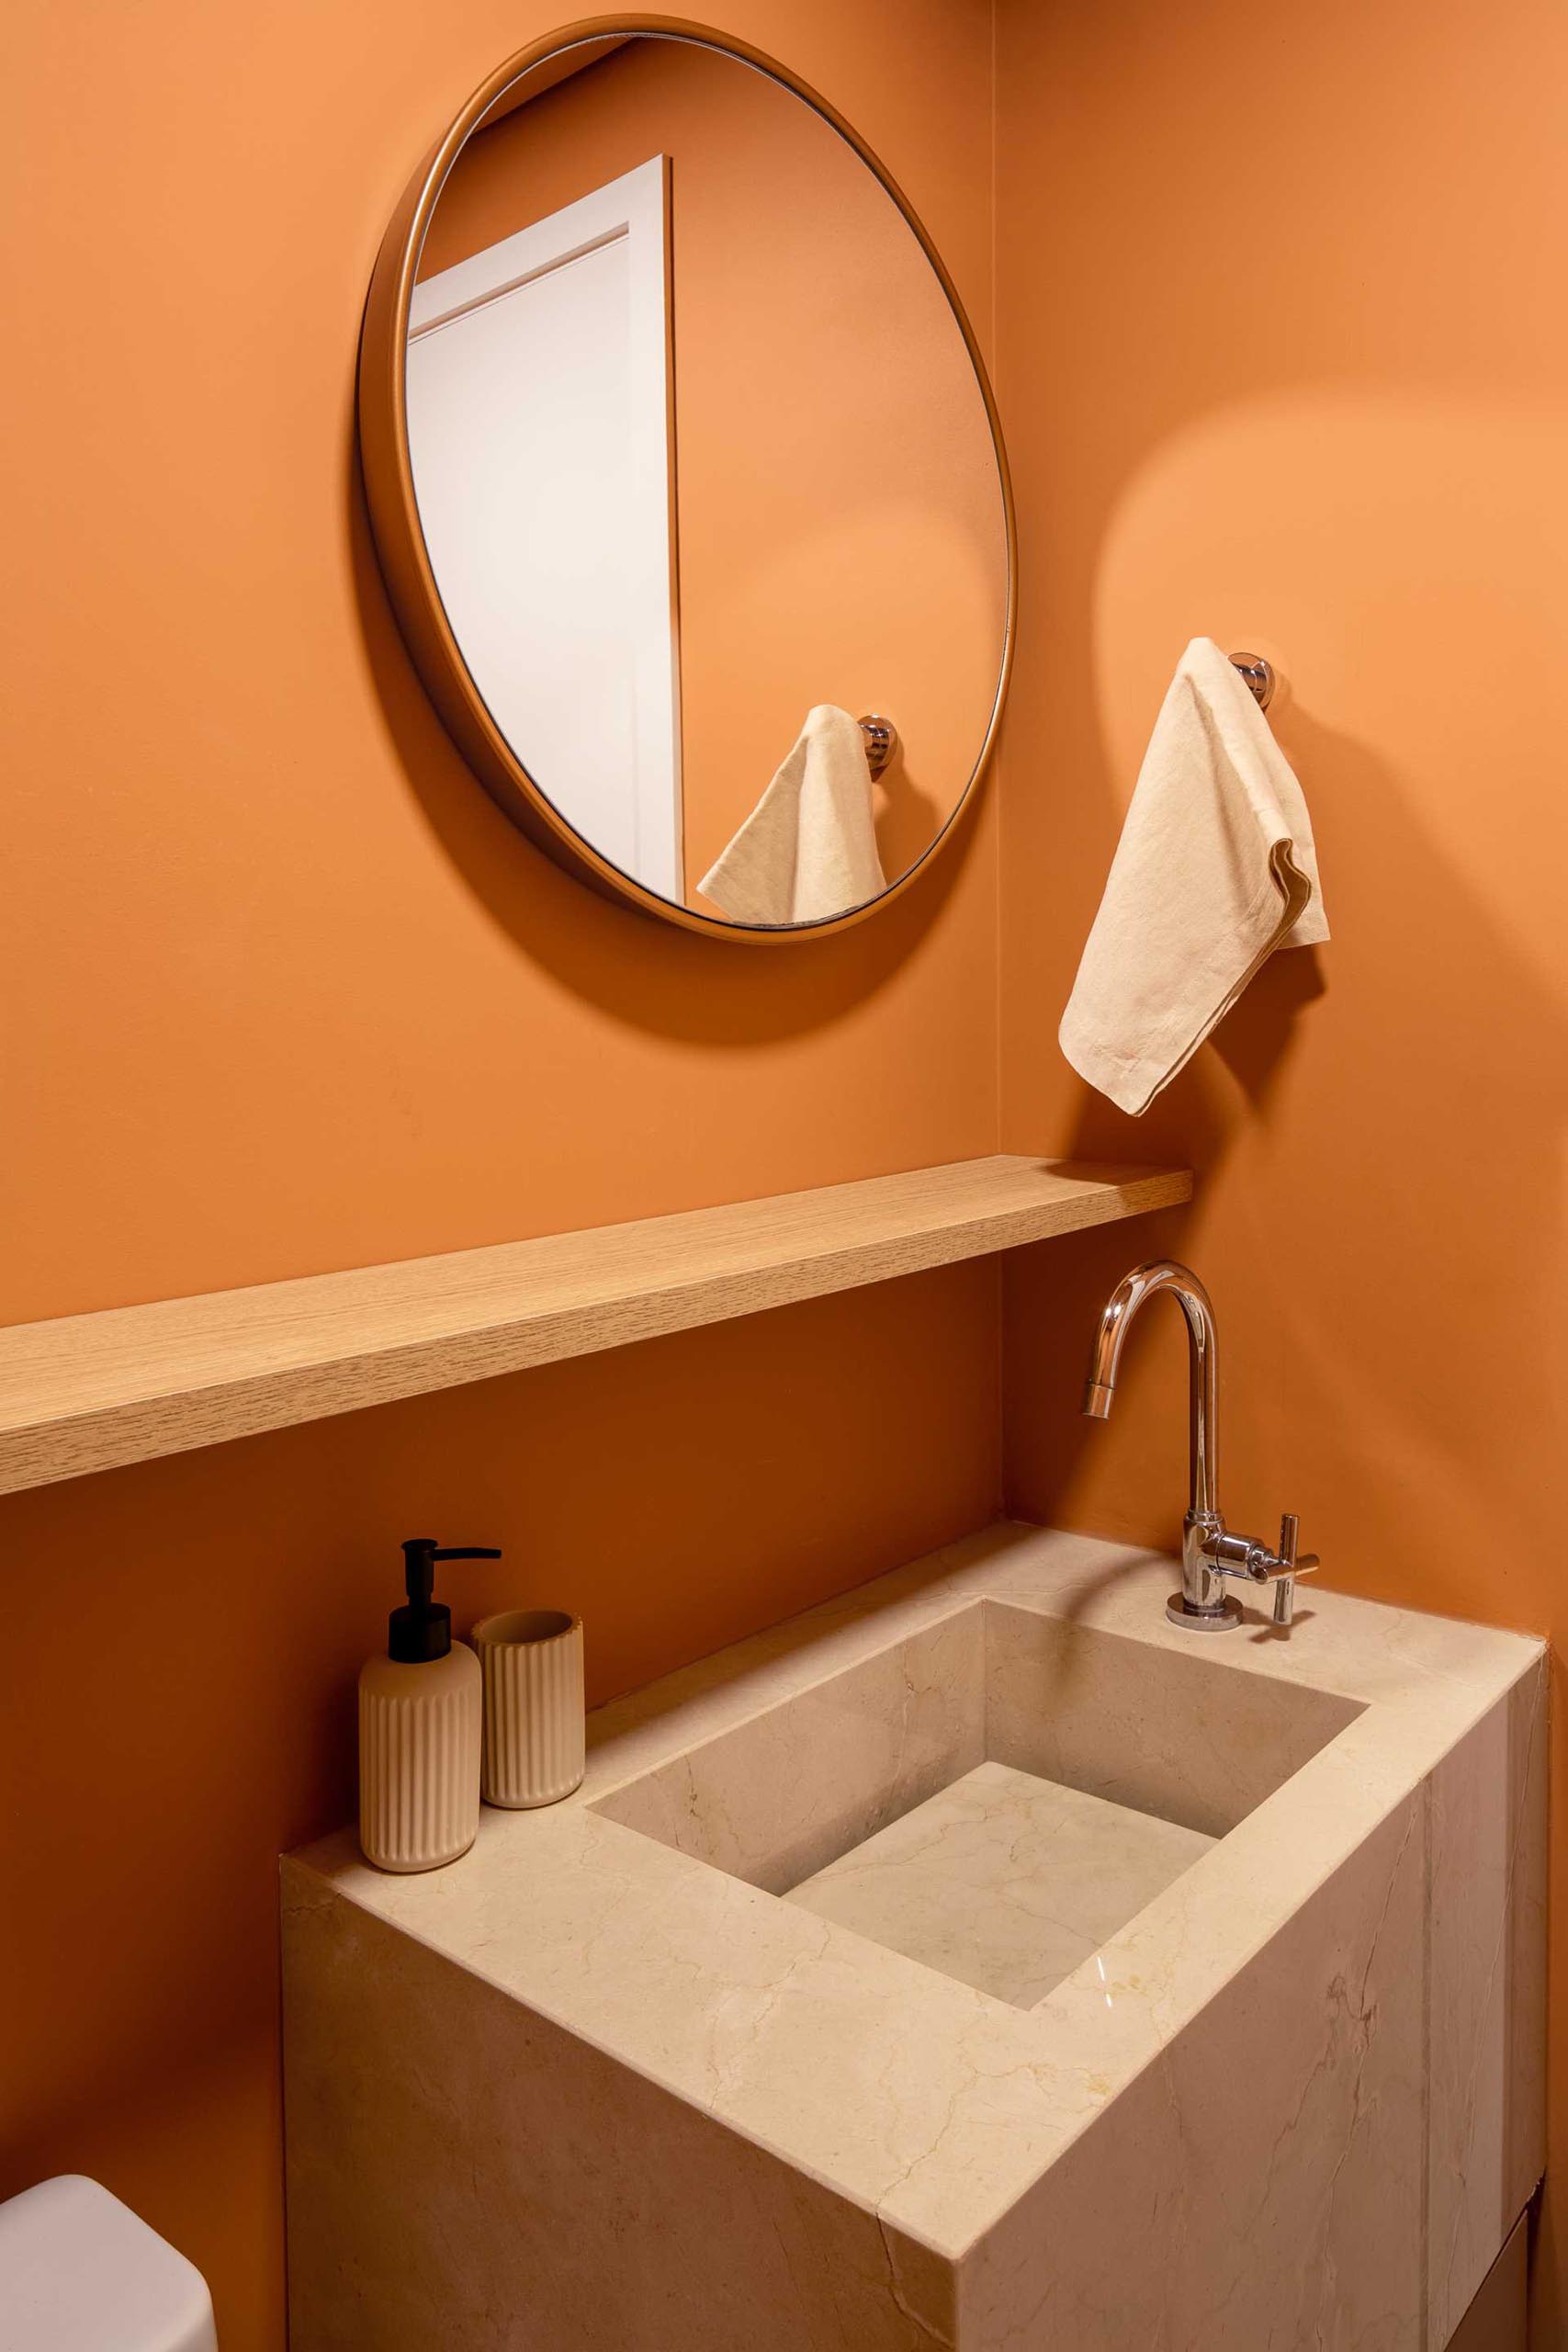 A modern powder room with matte terracotta colored walls.